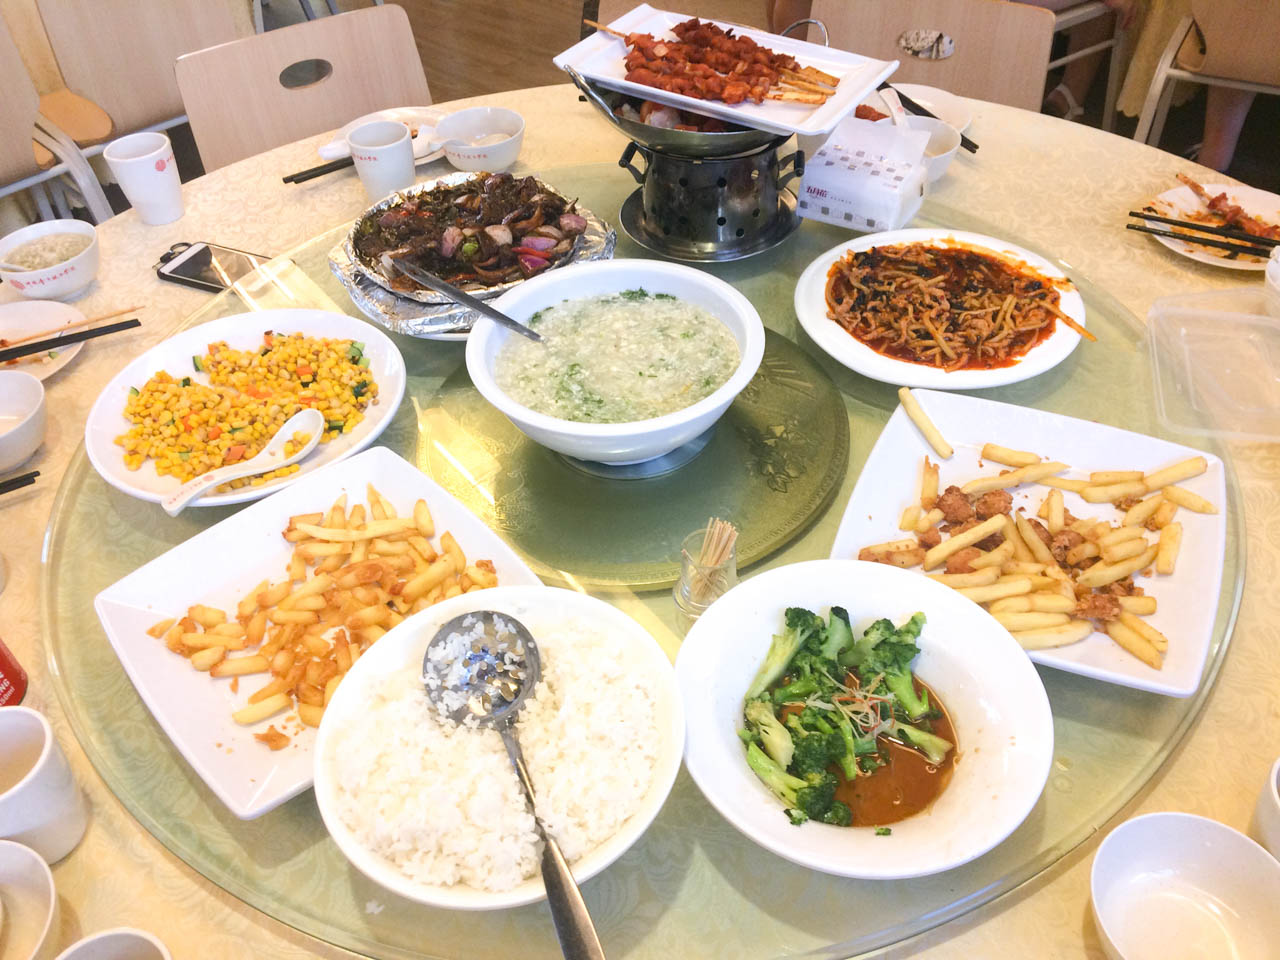 Chips, rice, and various Chinese dishes on a Lazy Susan rotating table